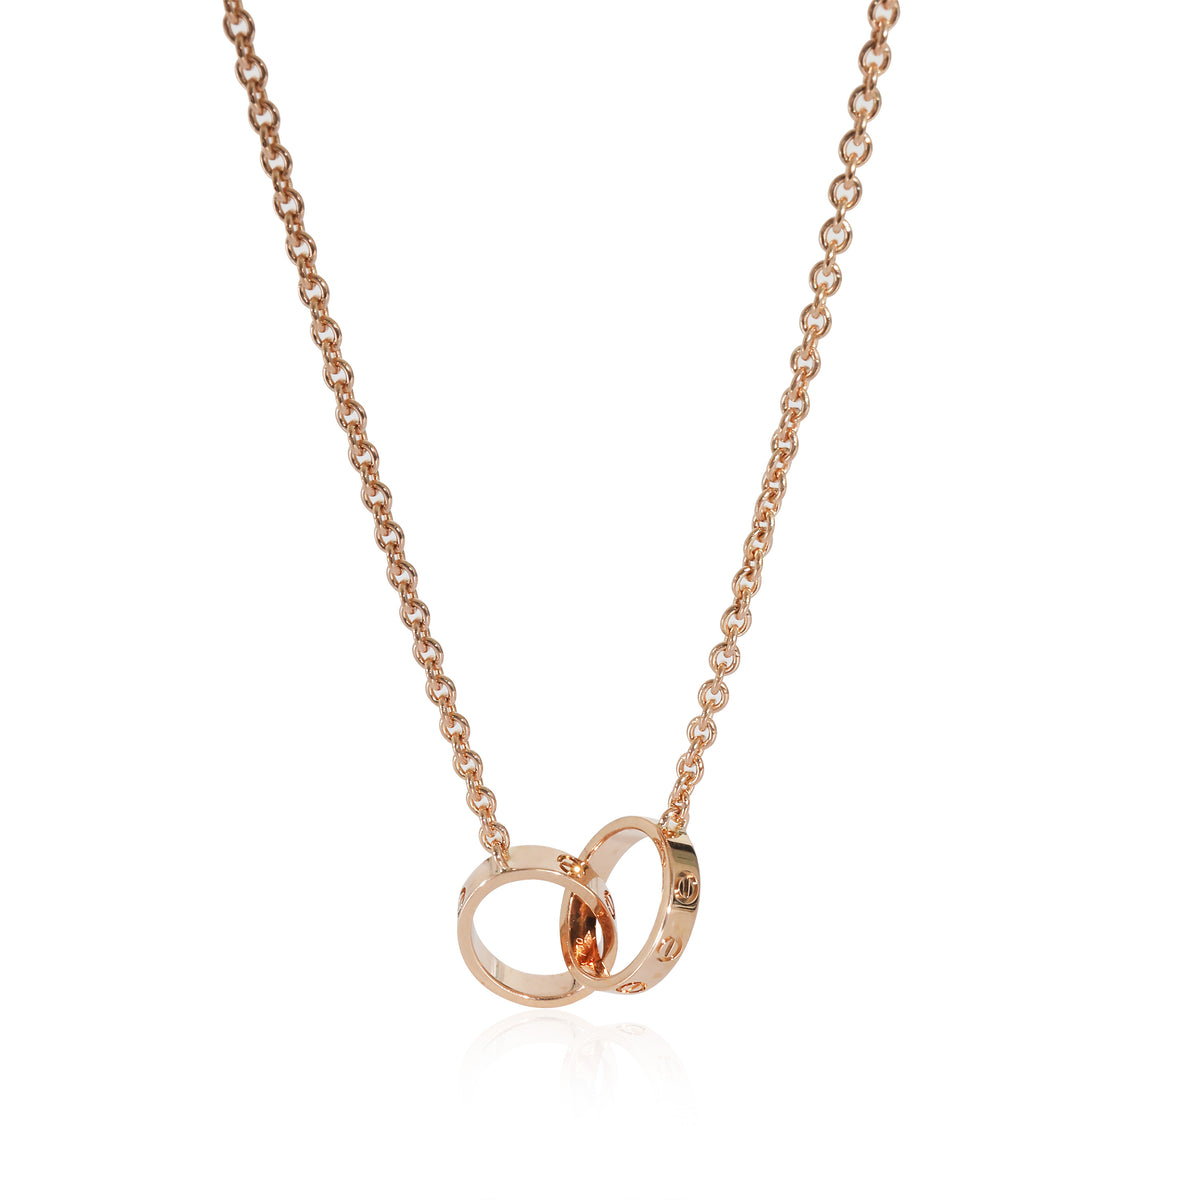 Cartier Love Fashion Necklace in 18k Rose Gold